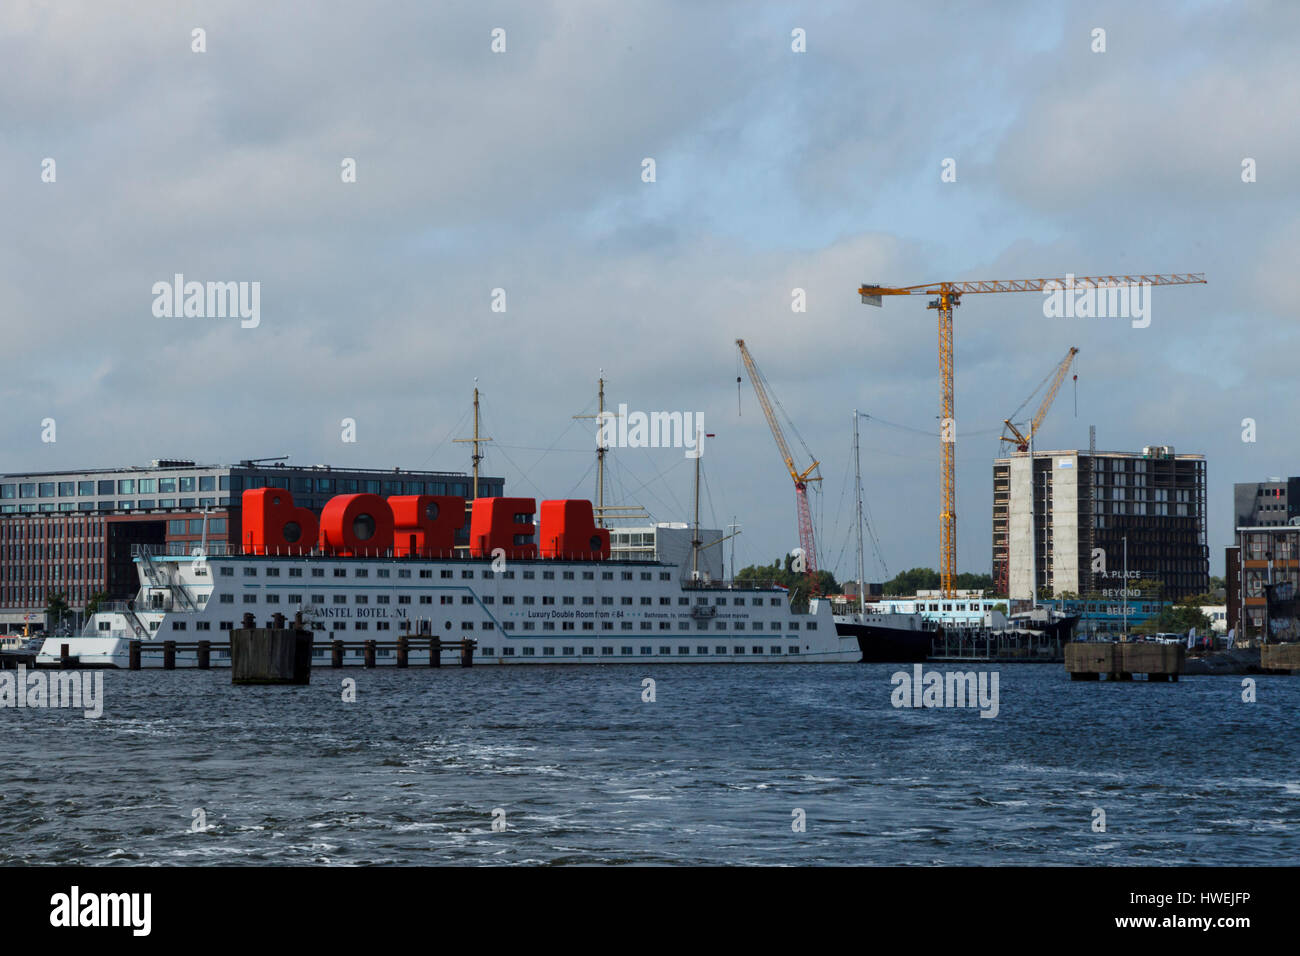 Botel, the floating hotel moored at the NDSM wharf in Amsterdam Stock Photo